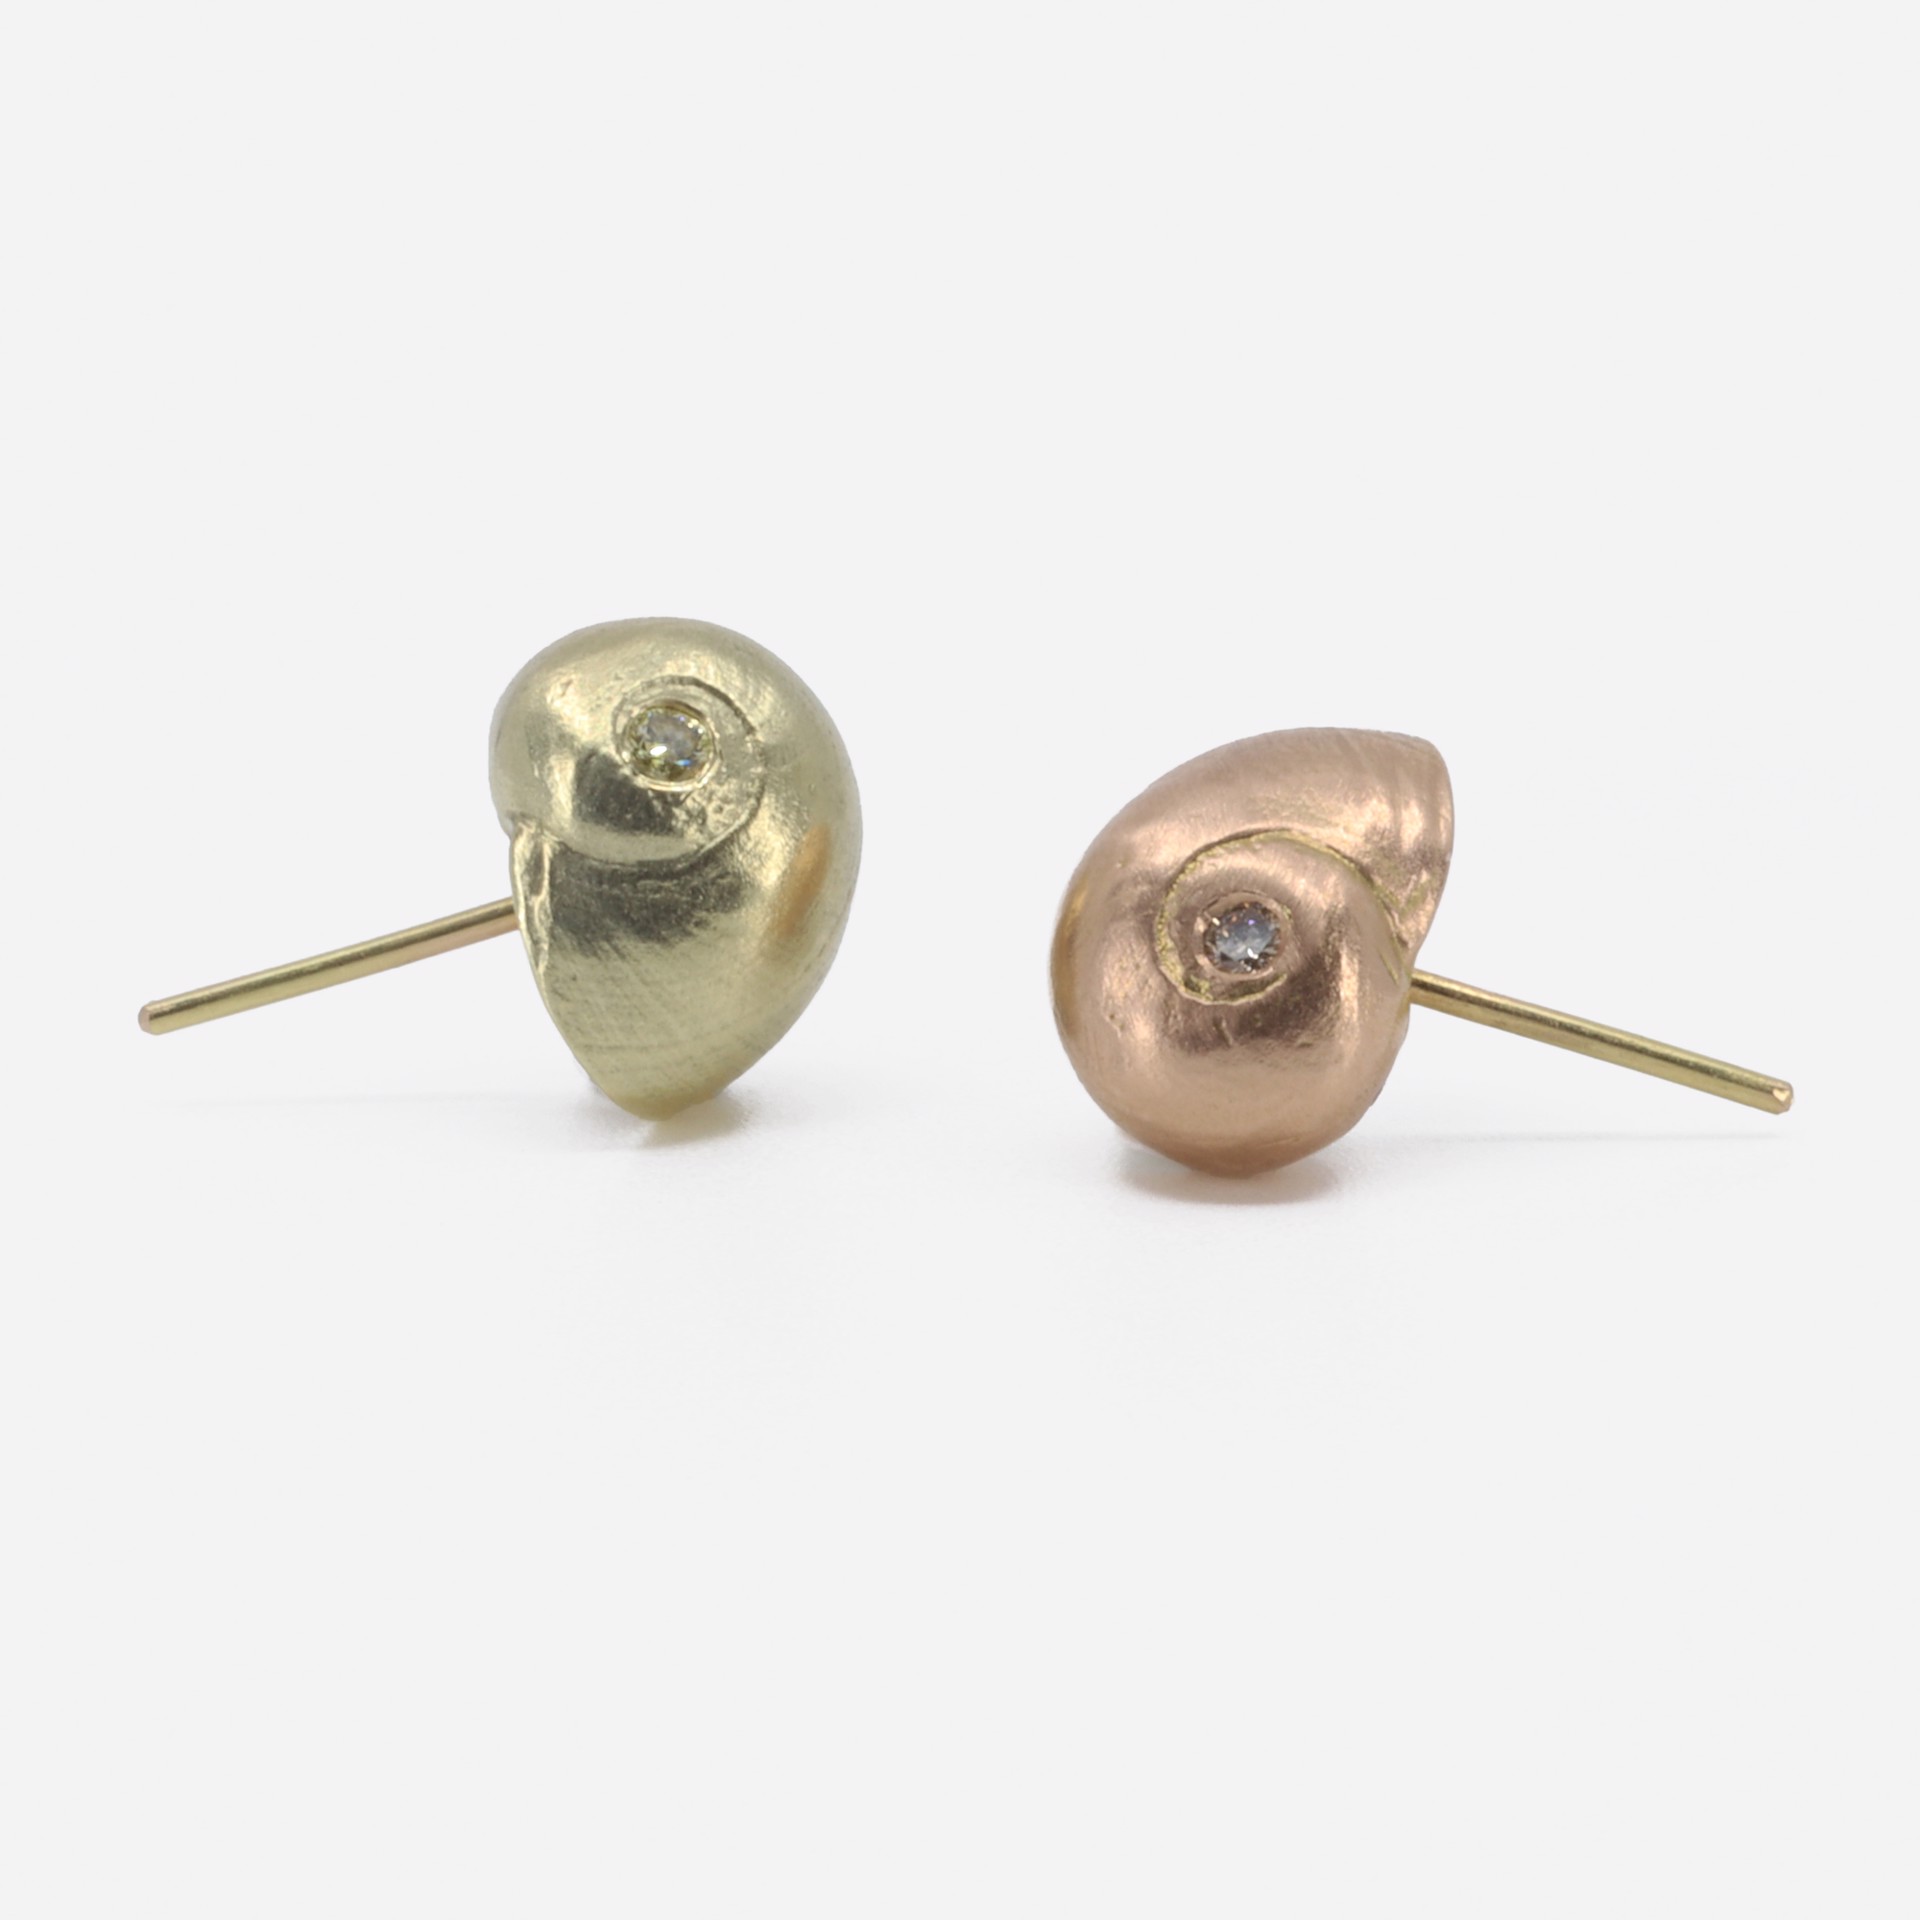 He Sells Seashell: Small Shell Earrings by Christopher Thompson Royds